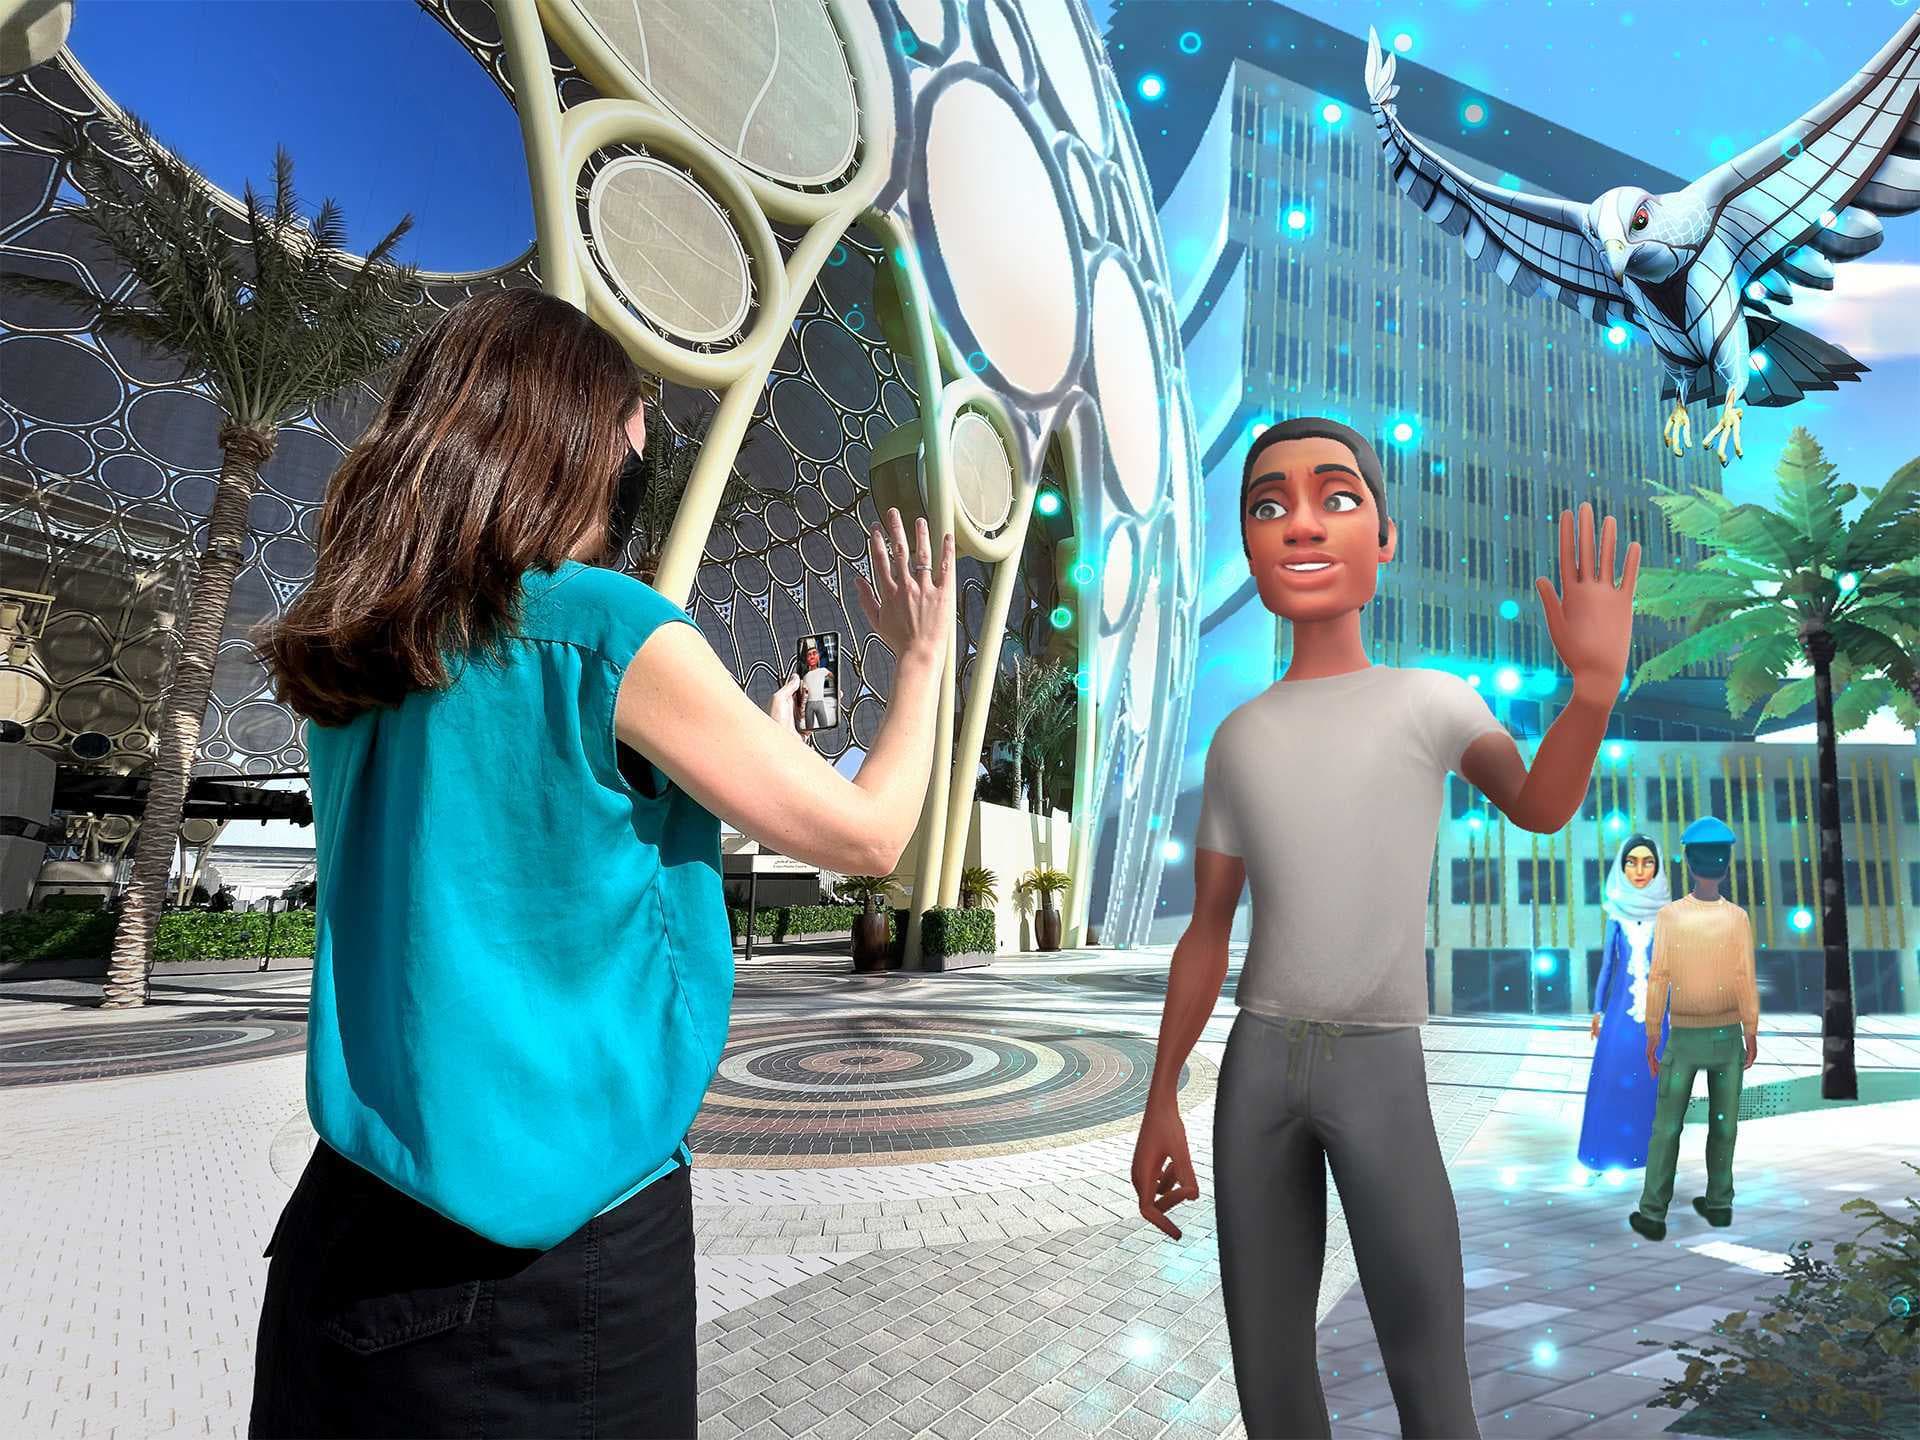 Almost All UAE Residents Aware of Metaverse